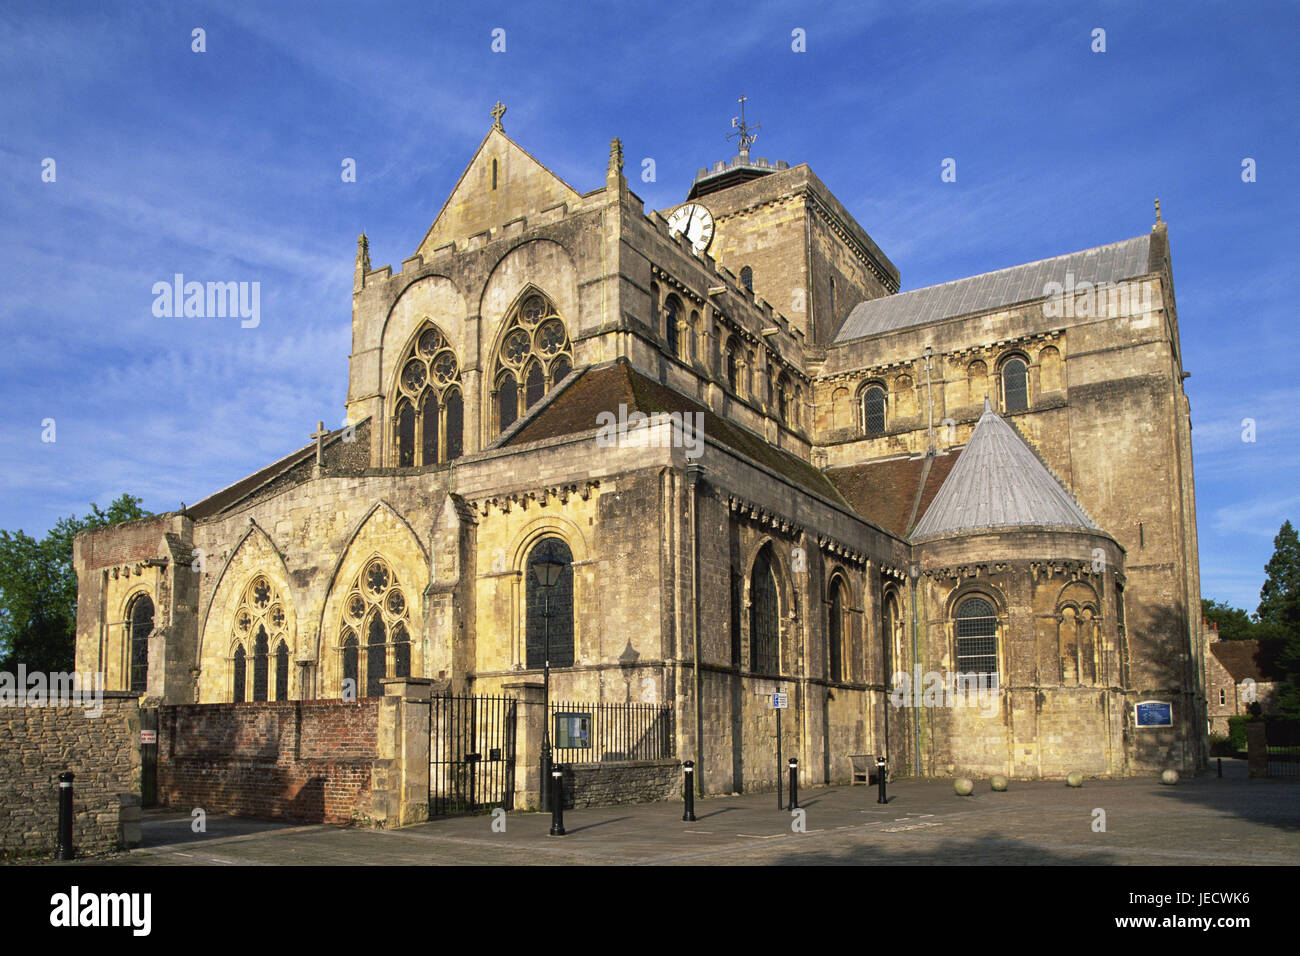 Great Britain, England, Hampshire, Romsey, cloister, church, Europe, destination, parish, place of interest, architecture, building, structure, church, sacred construction, minster, abbey, abbey church, faith, religion, Christianity, outside, deserted, Stock Photo